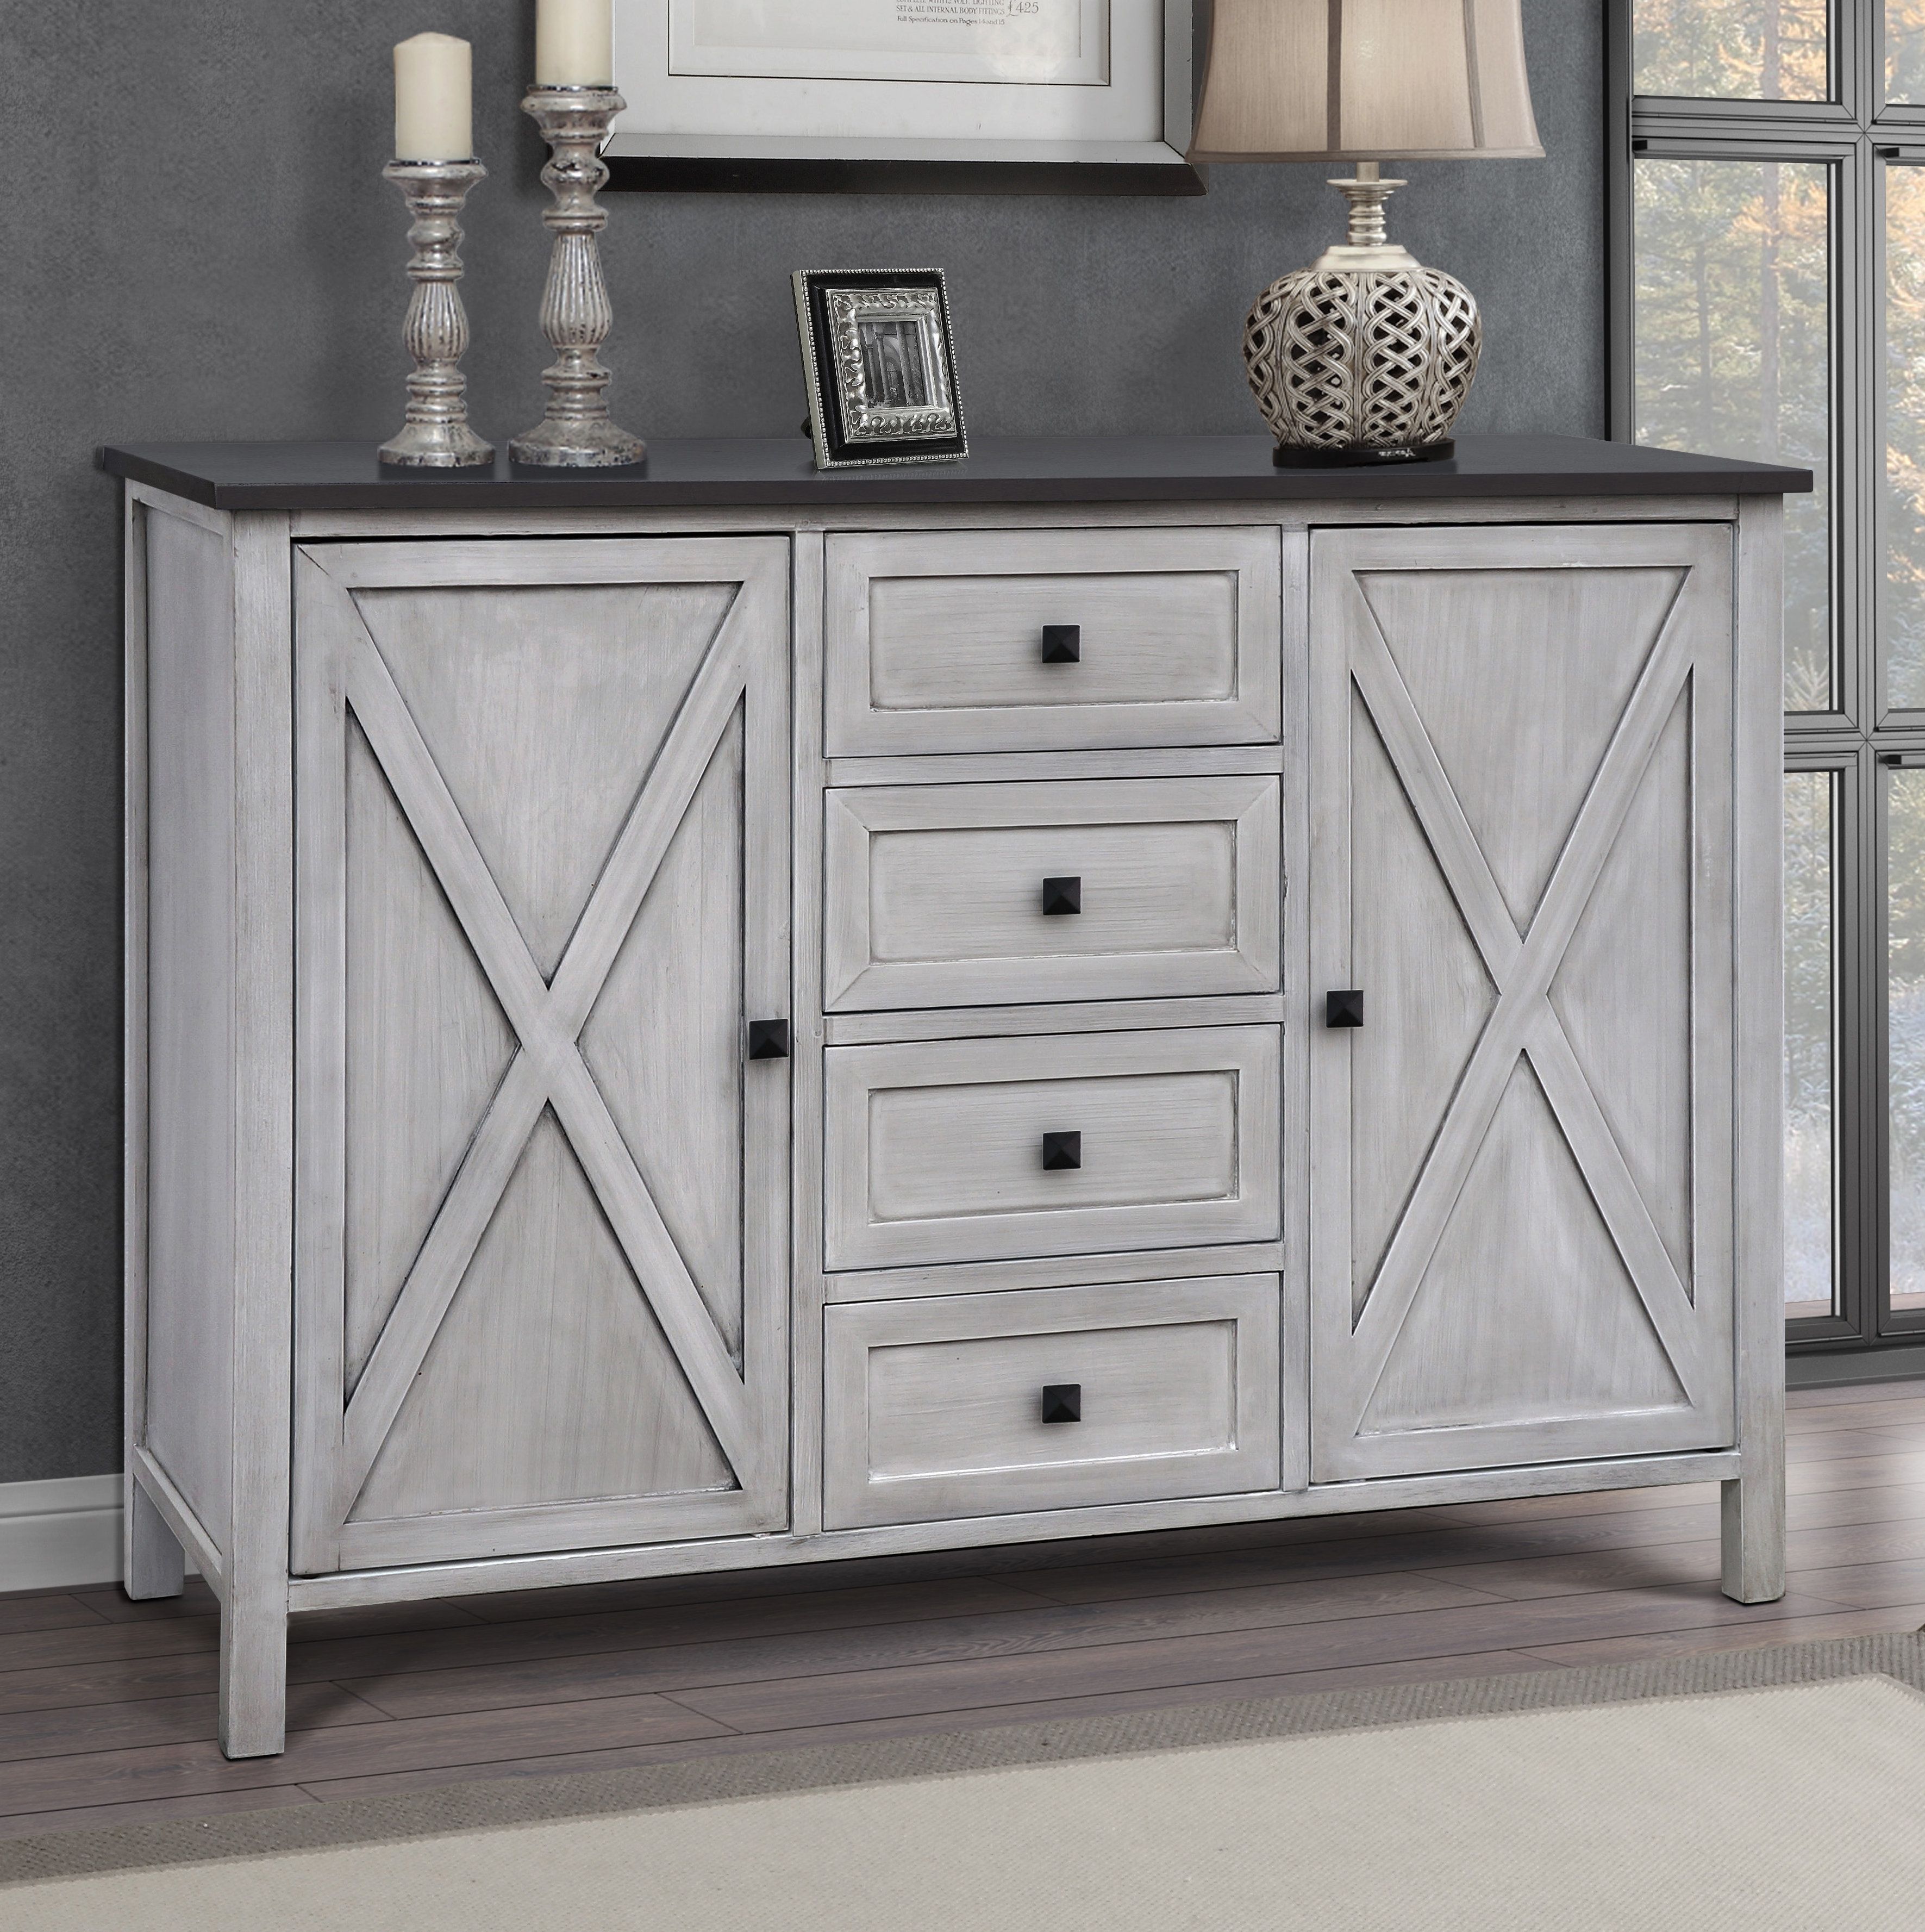 Lamb Farmhouse 4 Drawer 2 Door Accent Cabinet | Birch Lane Inside Most Current 4 Door 4 Drawer Metal Inserts Sideboards (Photo 14 of 20)